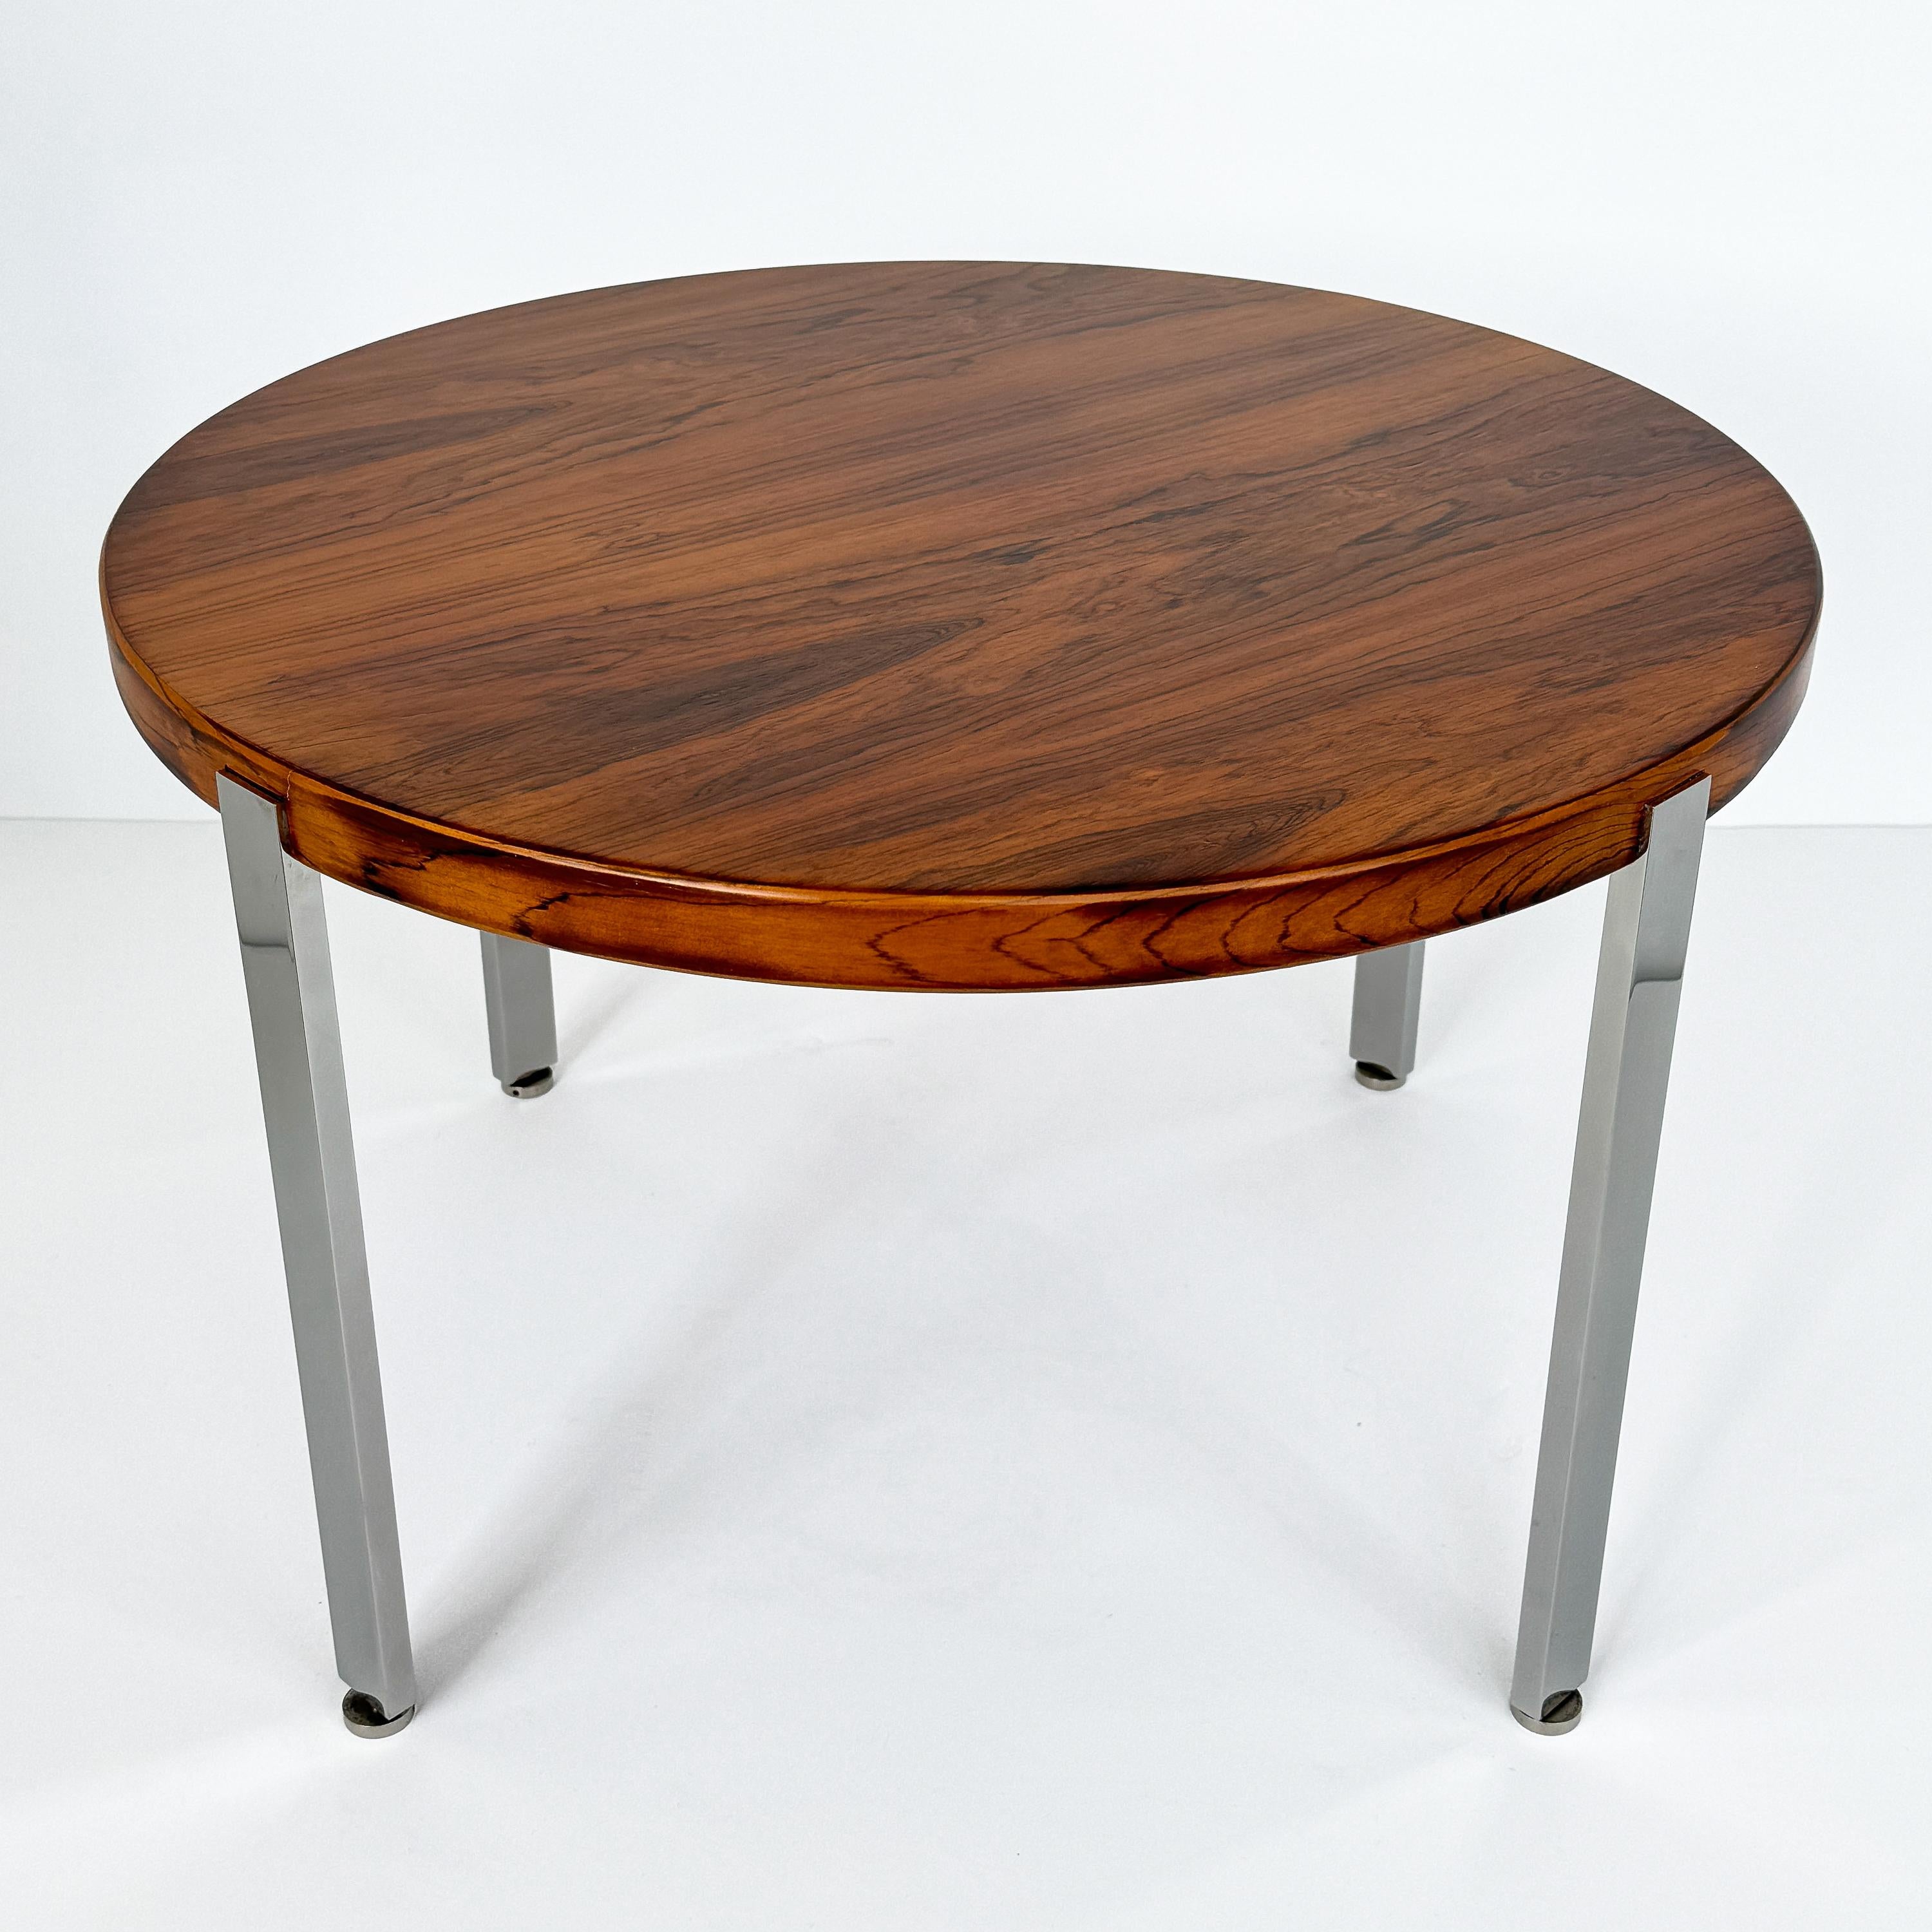 Polished Harvey Probber Architectural Series Rosewood and Steel Side Table